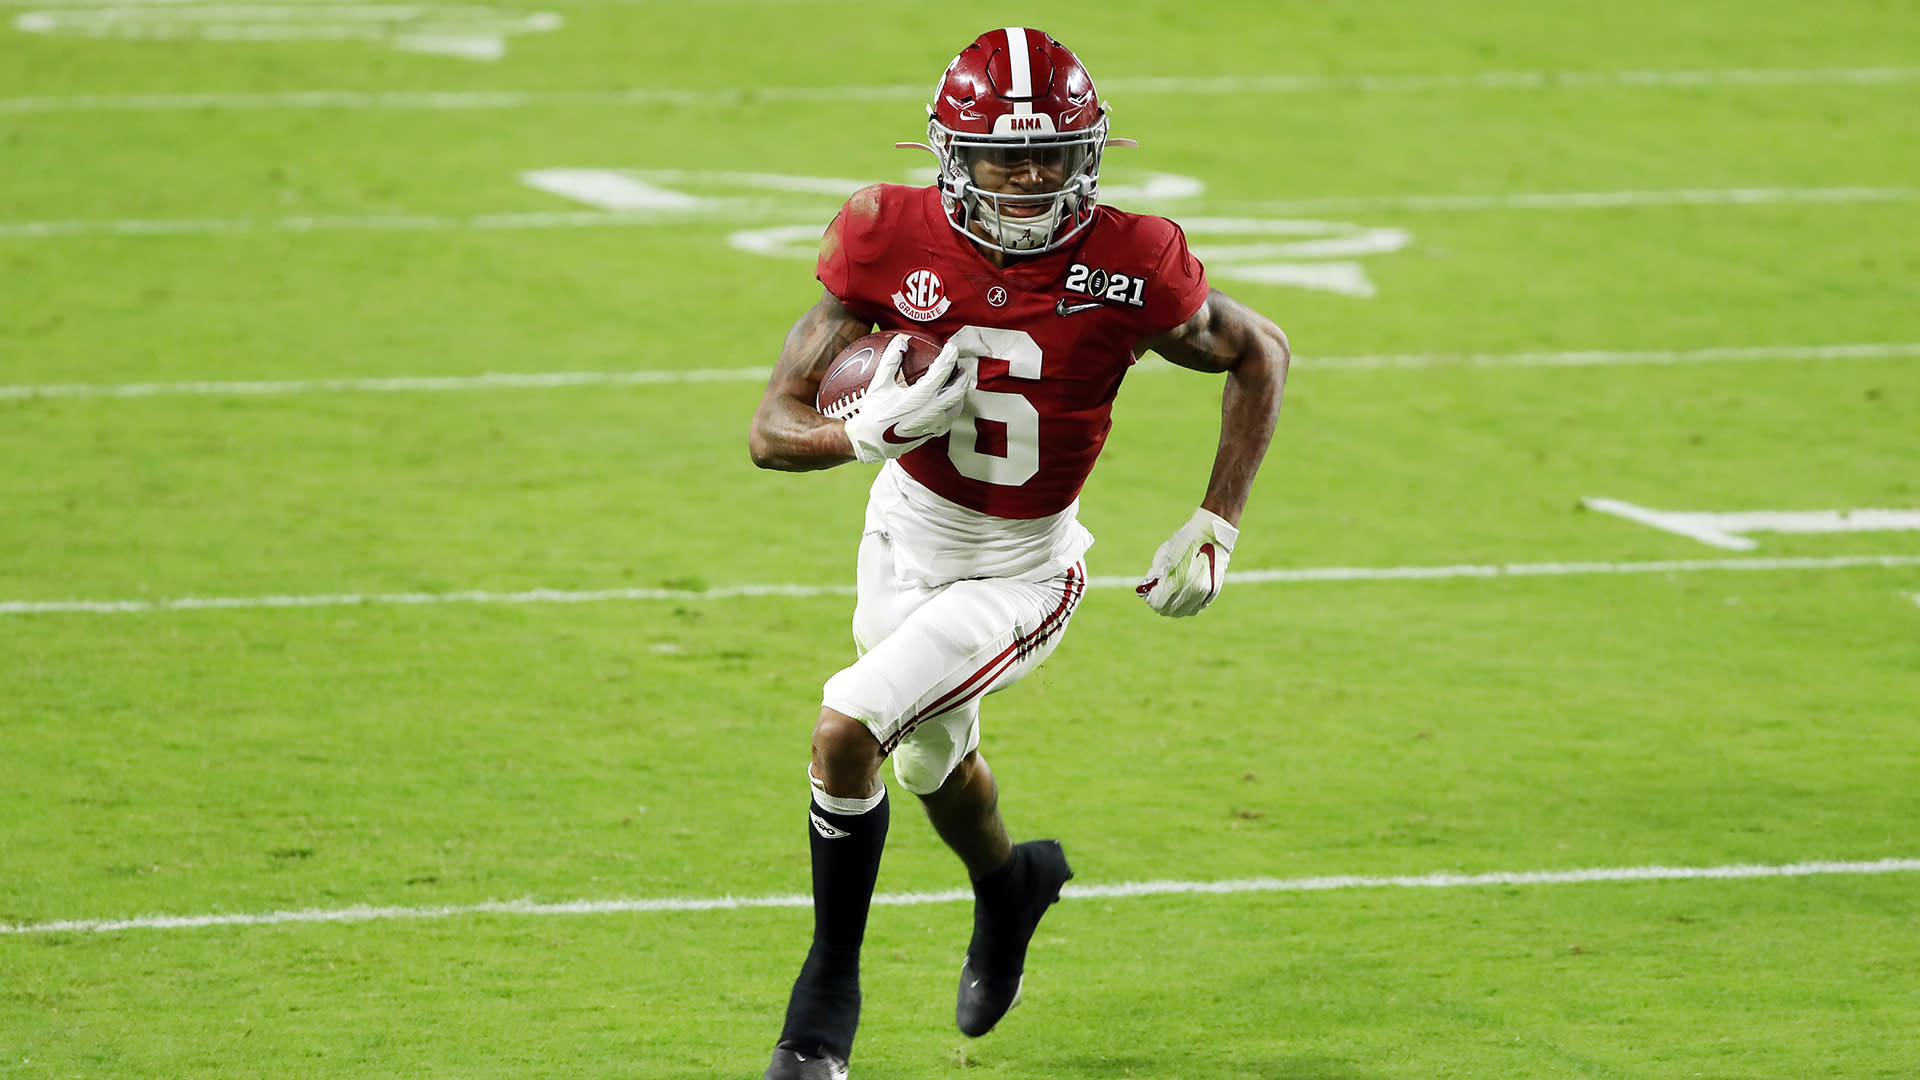 Scouting DeVonta Smith: Alabama WR reminiscent of Marvin Harrison